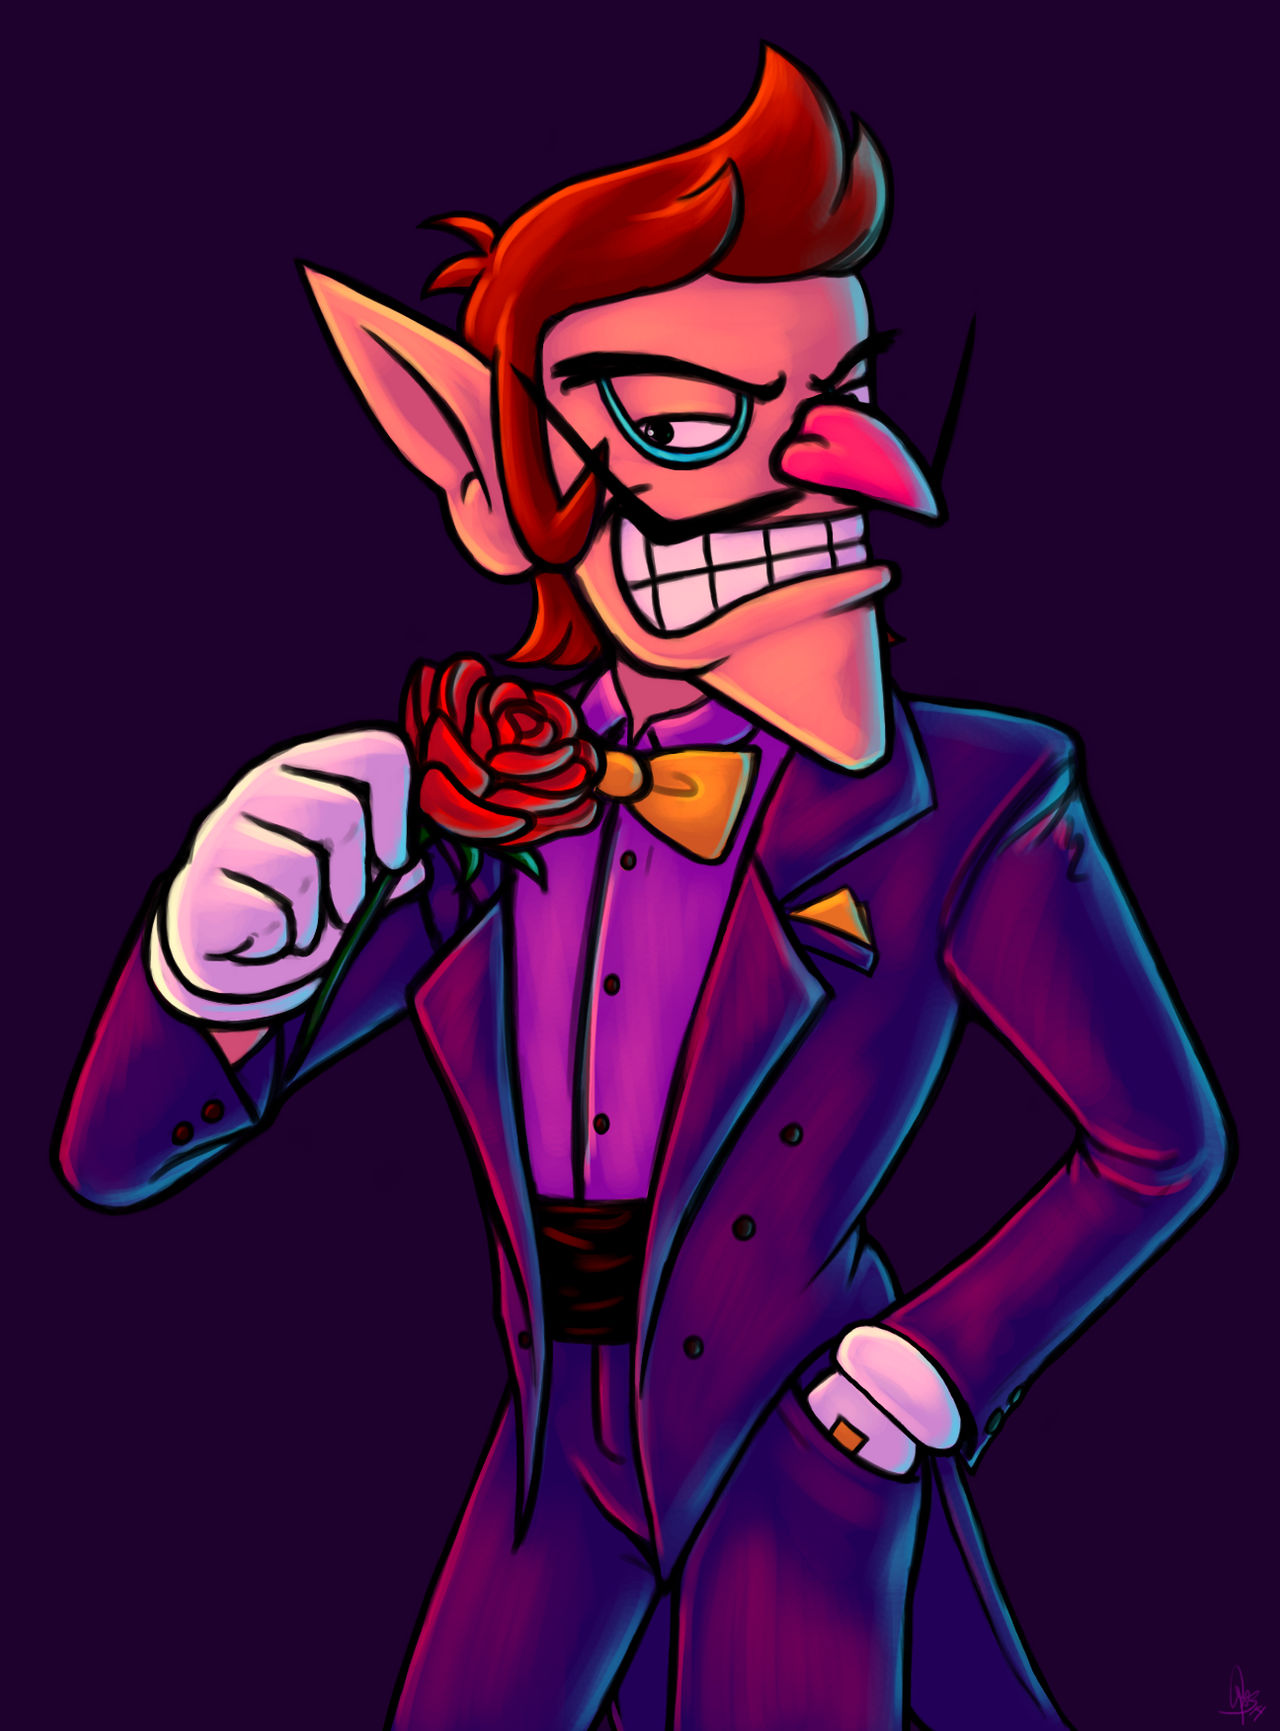 Snazzy Waluigi by Astral-Agonoficus on DeviantArt